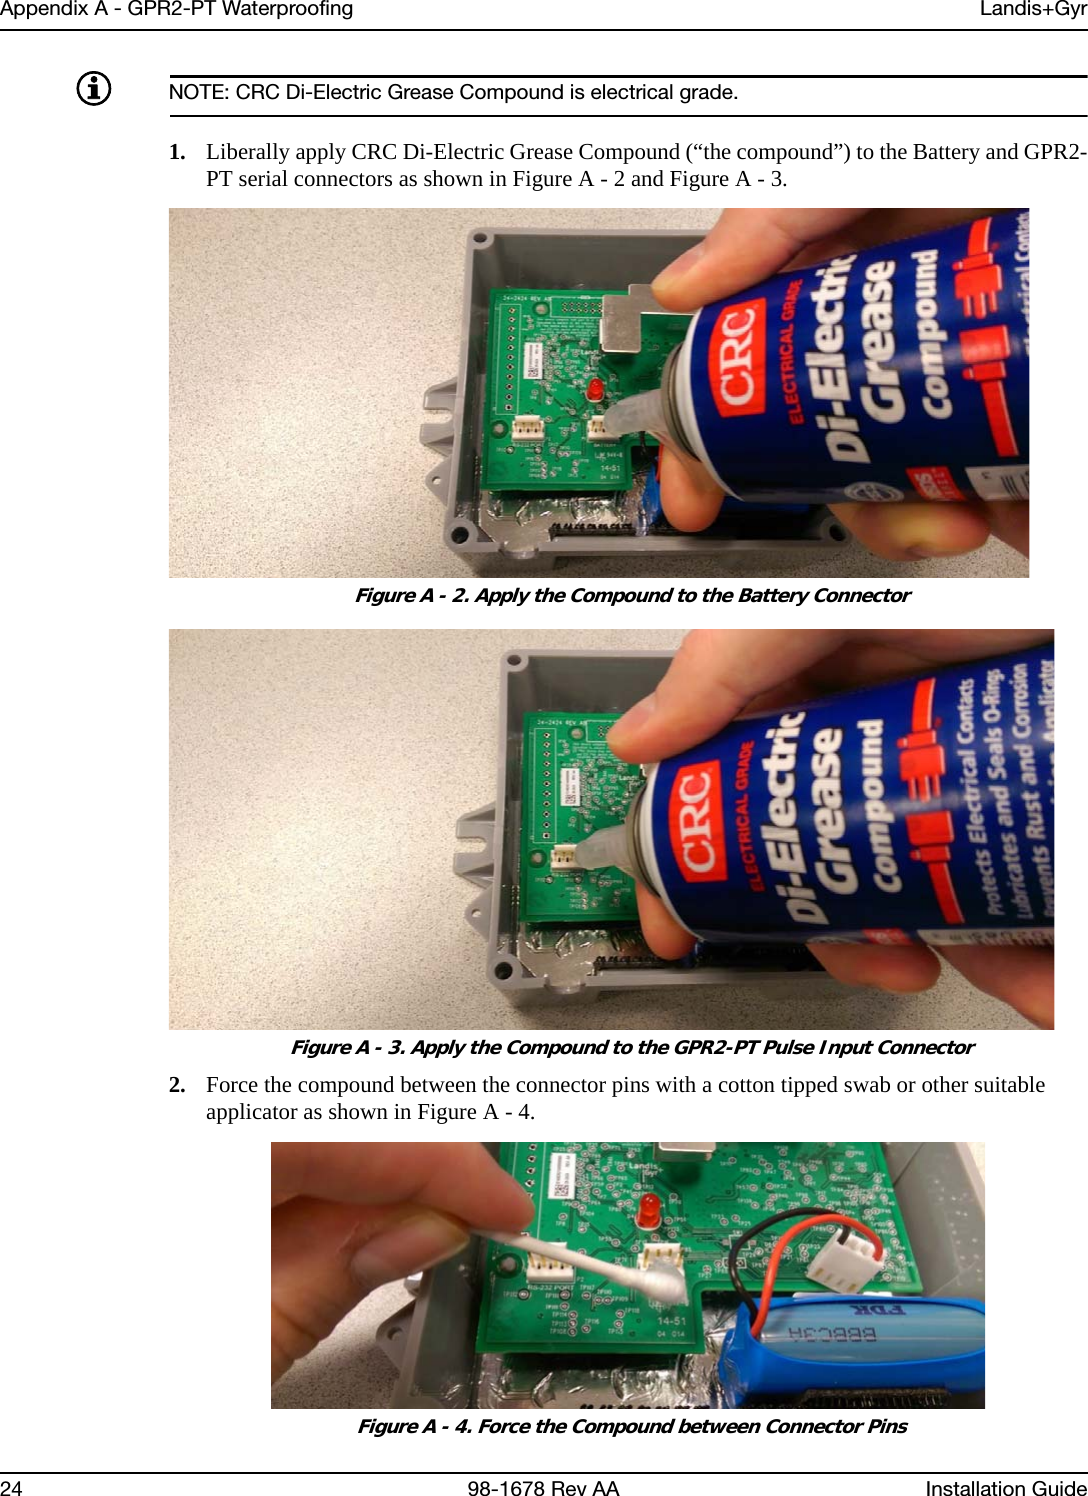 Appendix A - GPR2-PT Waterproofing Landis+Gyr24 98-1678 Rev AA Installation GuideNOTE: CRC Di-Electric Grease Compound is electrical grade.1. Liberally apply CRC Di-Electric Grease Compound (“the compound”) to the Battery and GPR2-PT serial connectors as shown in Figure A - 2 and Figure A - 3. Figure A - 2. Apply the Compound to the Battery Connector Figure A - 3. Apply the Compound to the GPR2-PT Pulse Input Connector2. Force the compound between the connector pins with a cotton tipped swab or other suitable applicator as shown in Figure A - 4. Figure A - 4. Force the Compound between Connector Pins